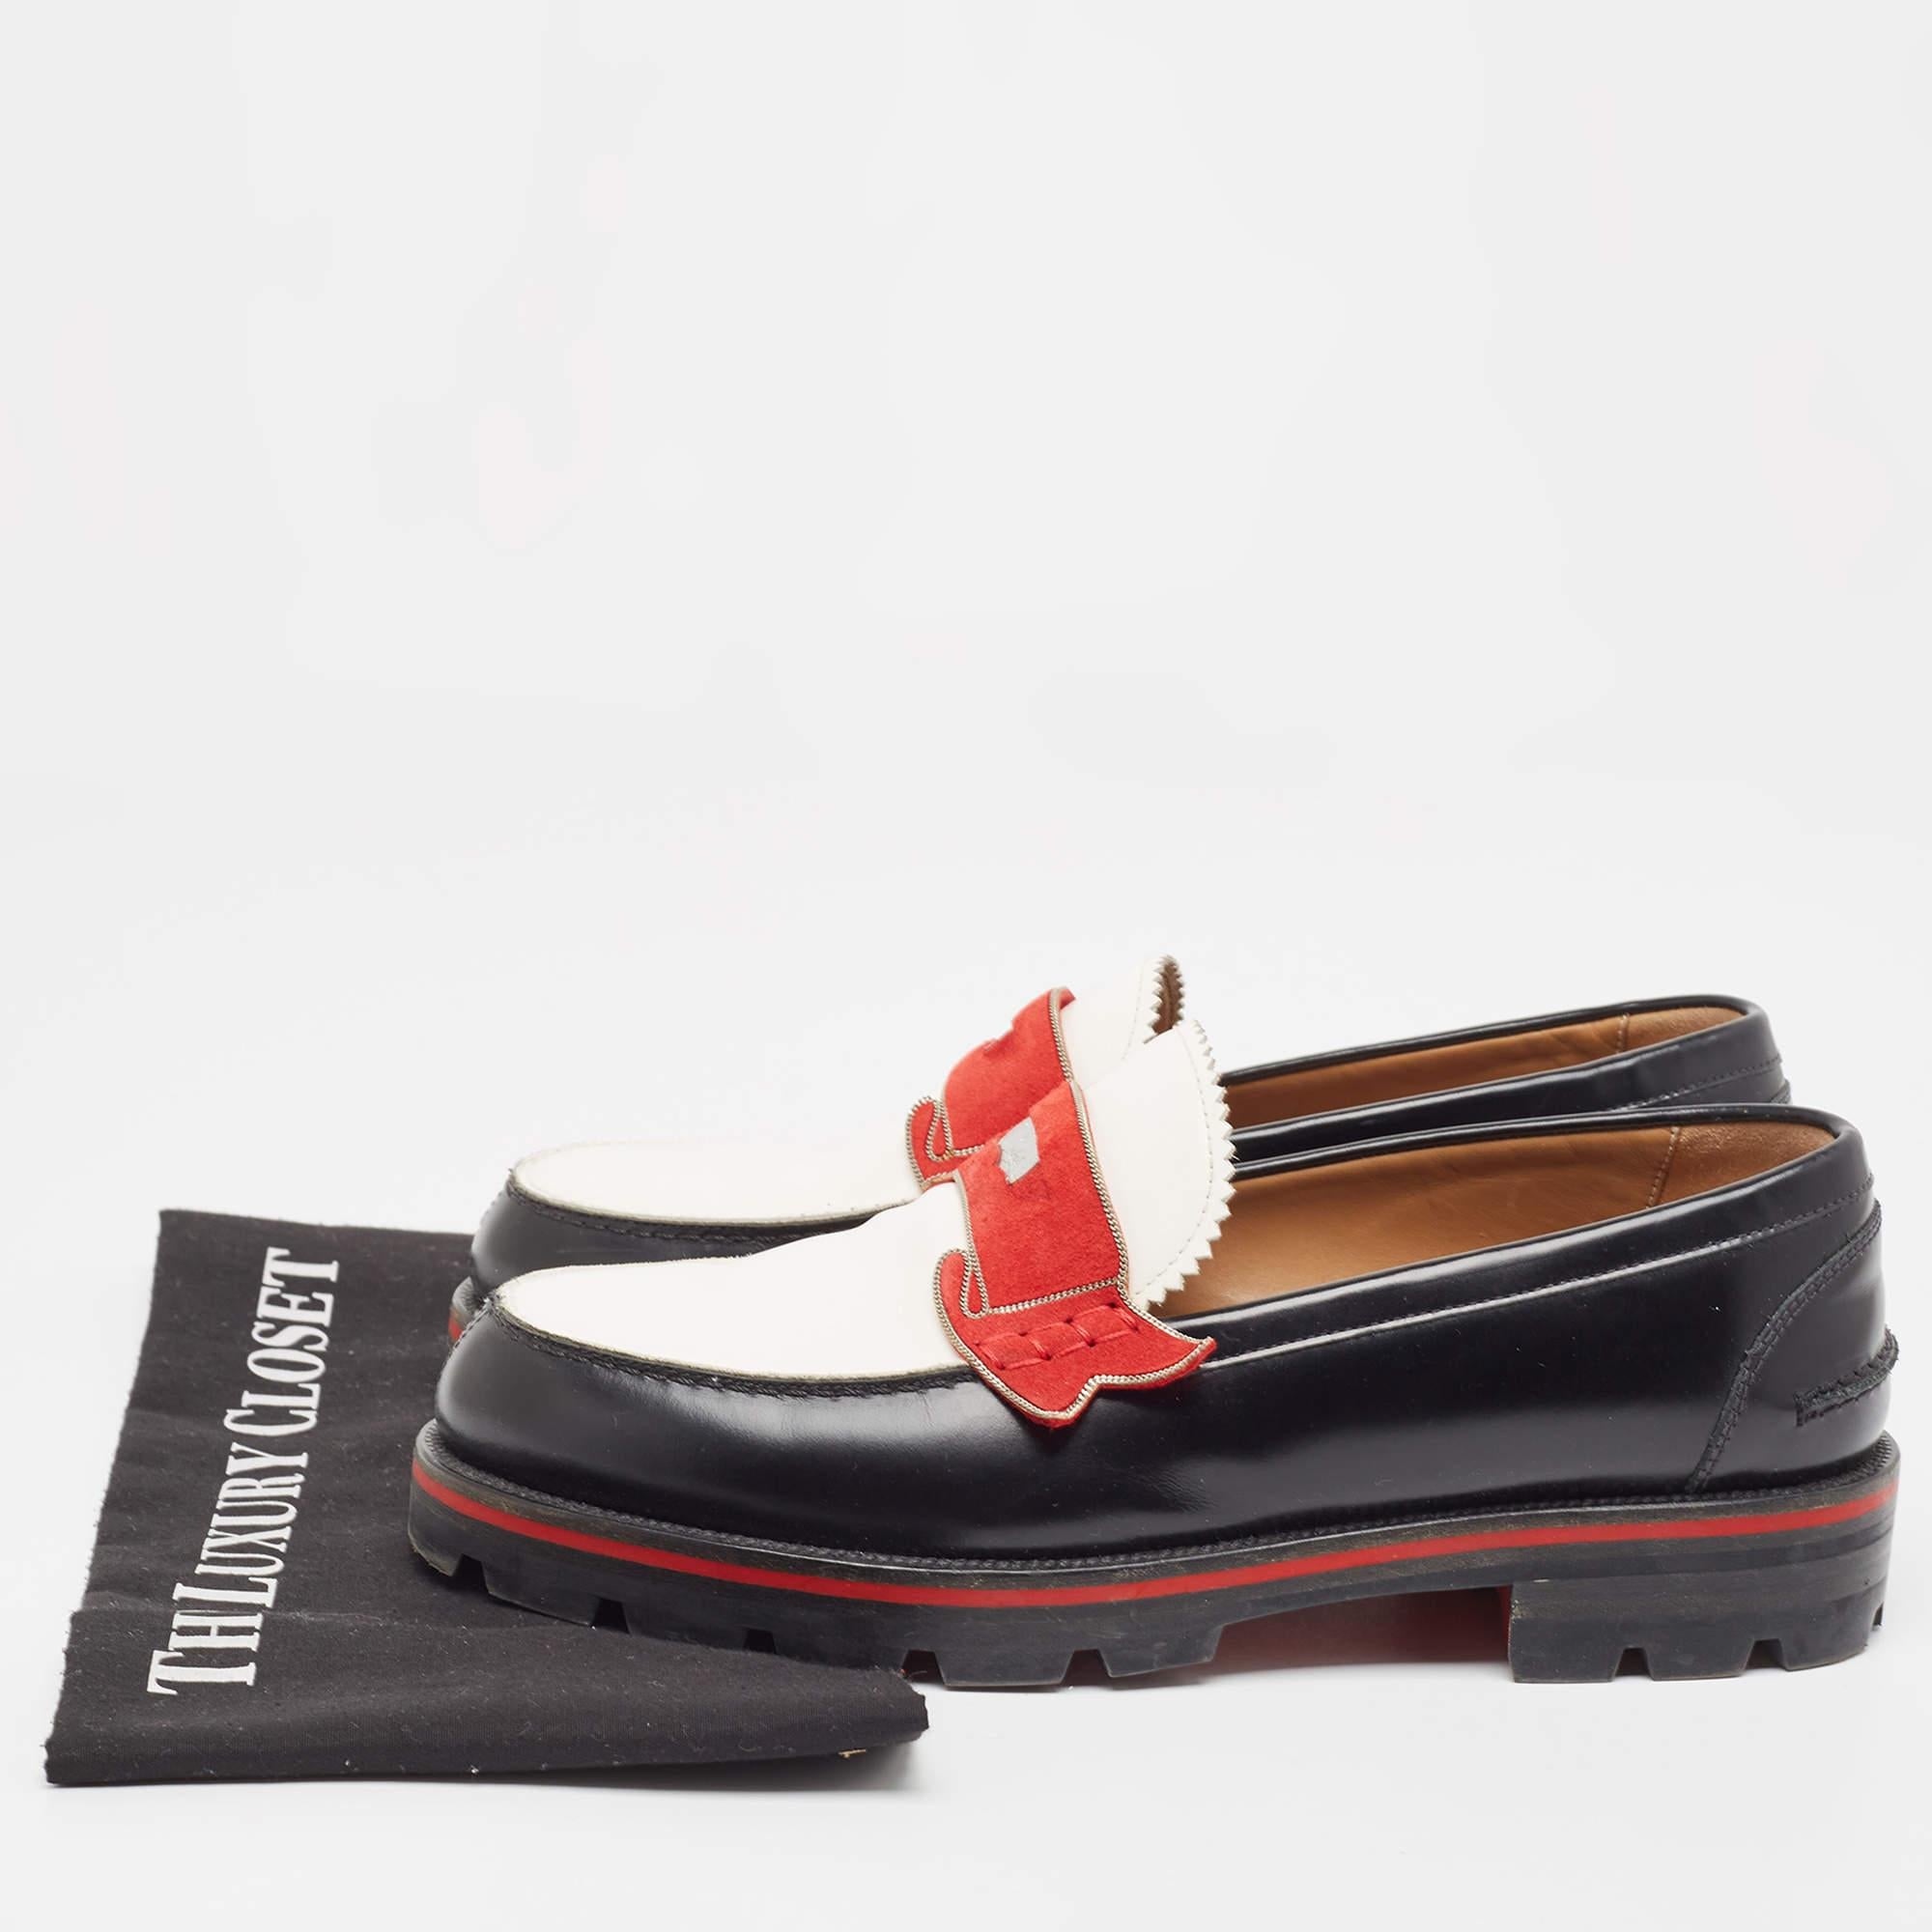 Christian Louboutin Tricolor Leather Monono Loafers Size 40 For Sale 5